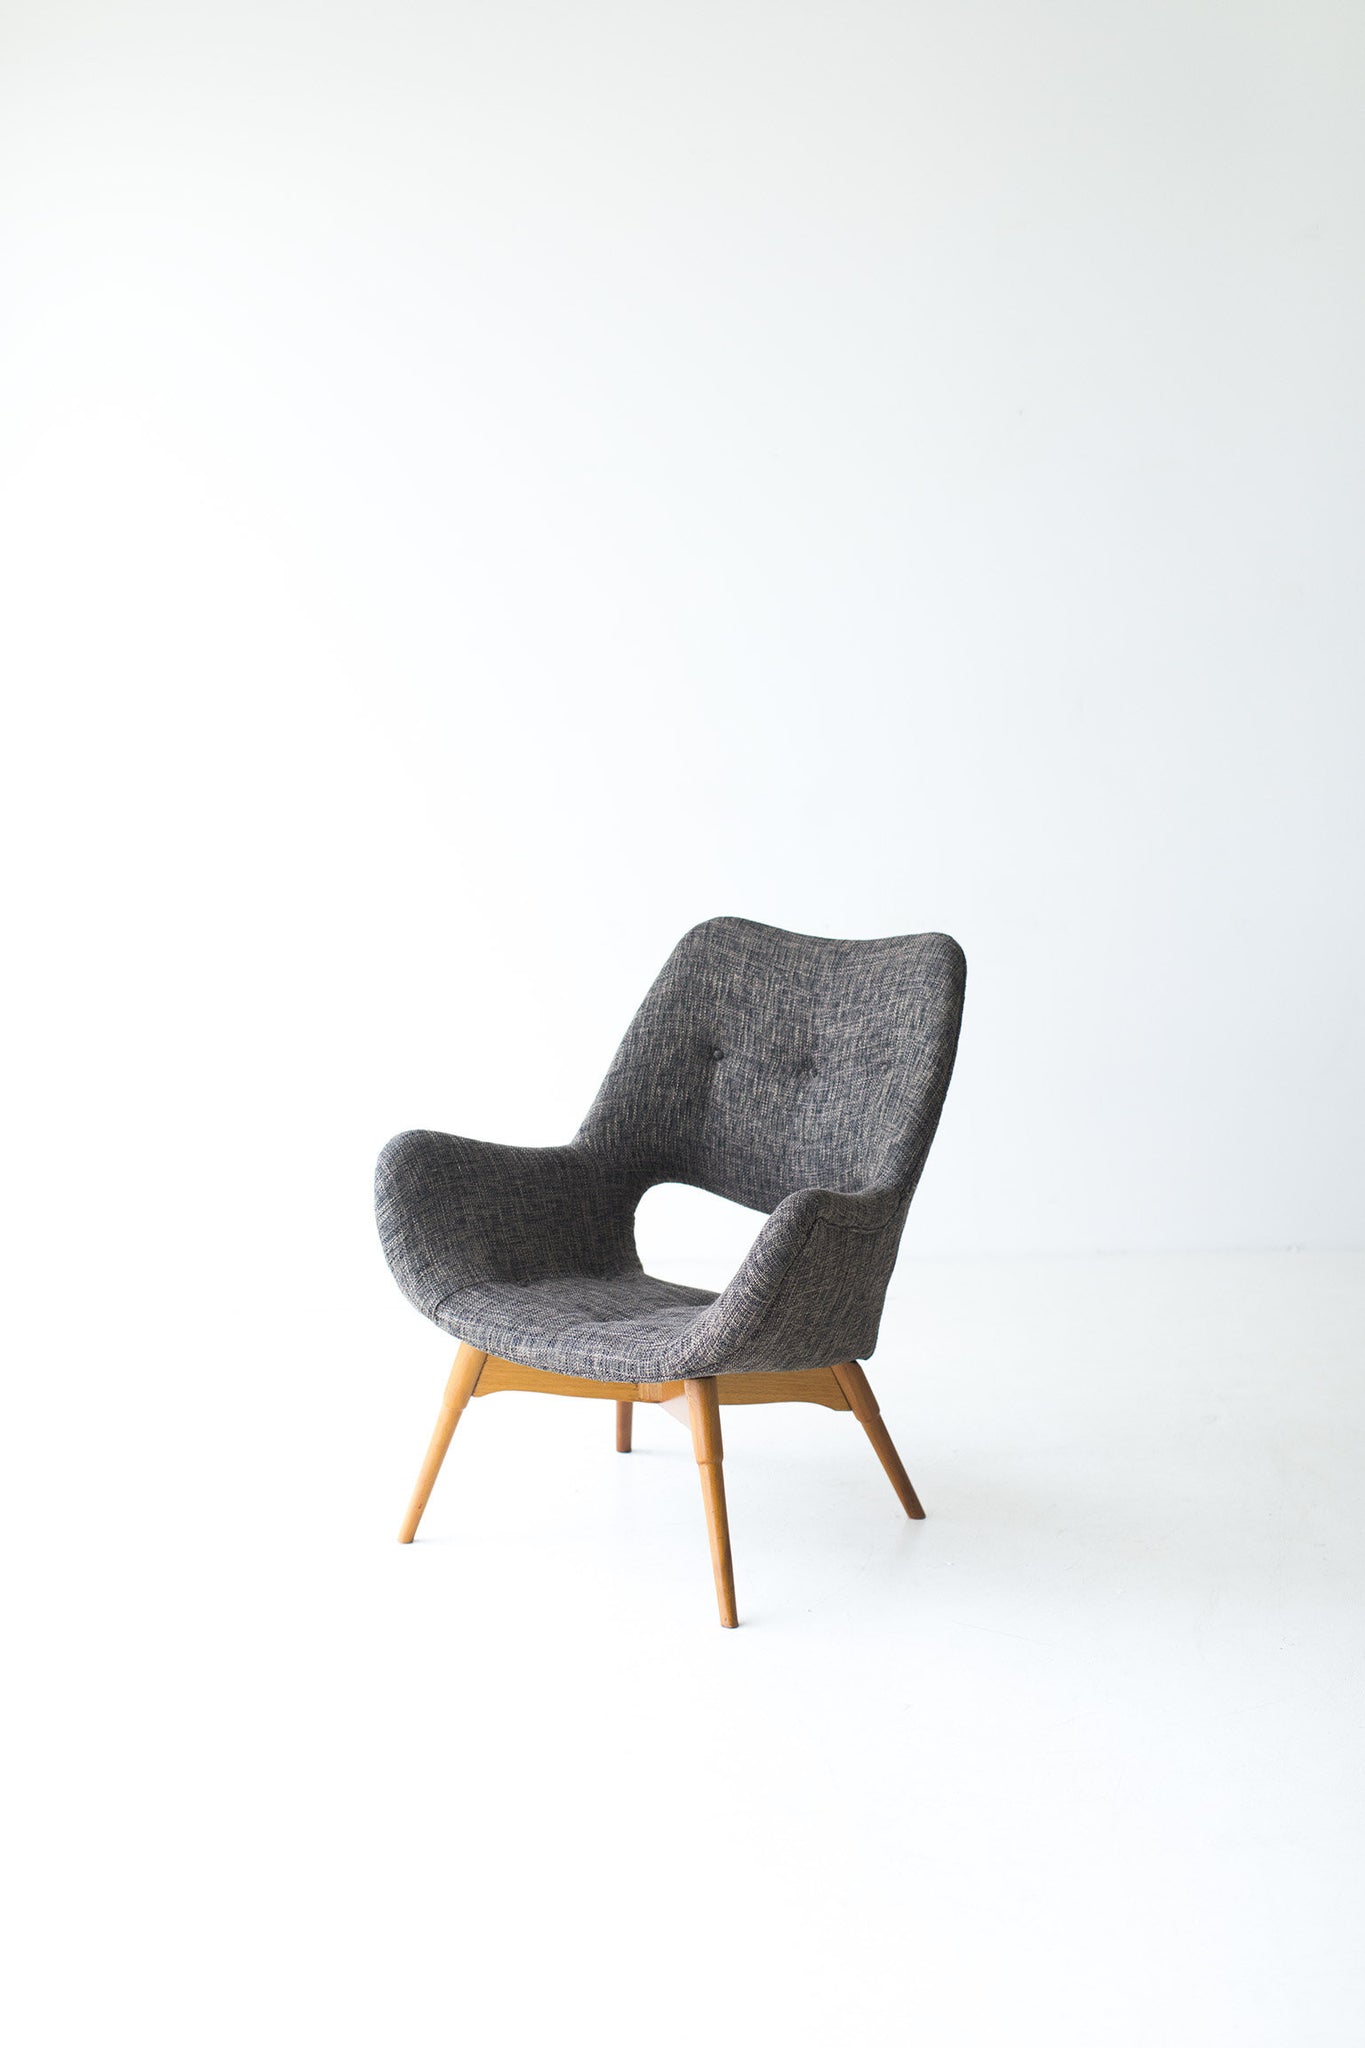 grant-featherston-lounge-chair-11